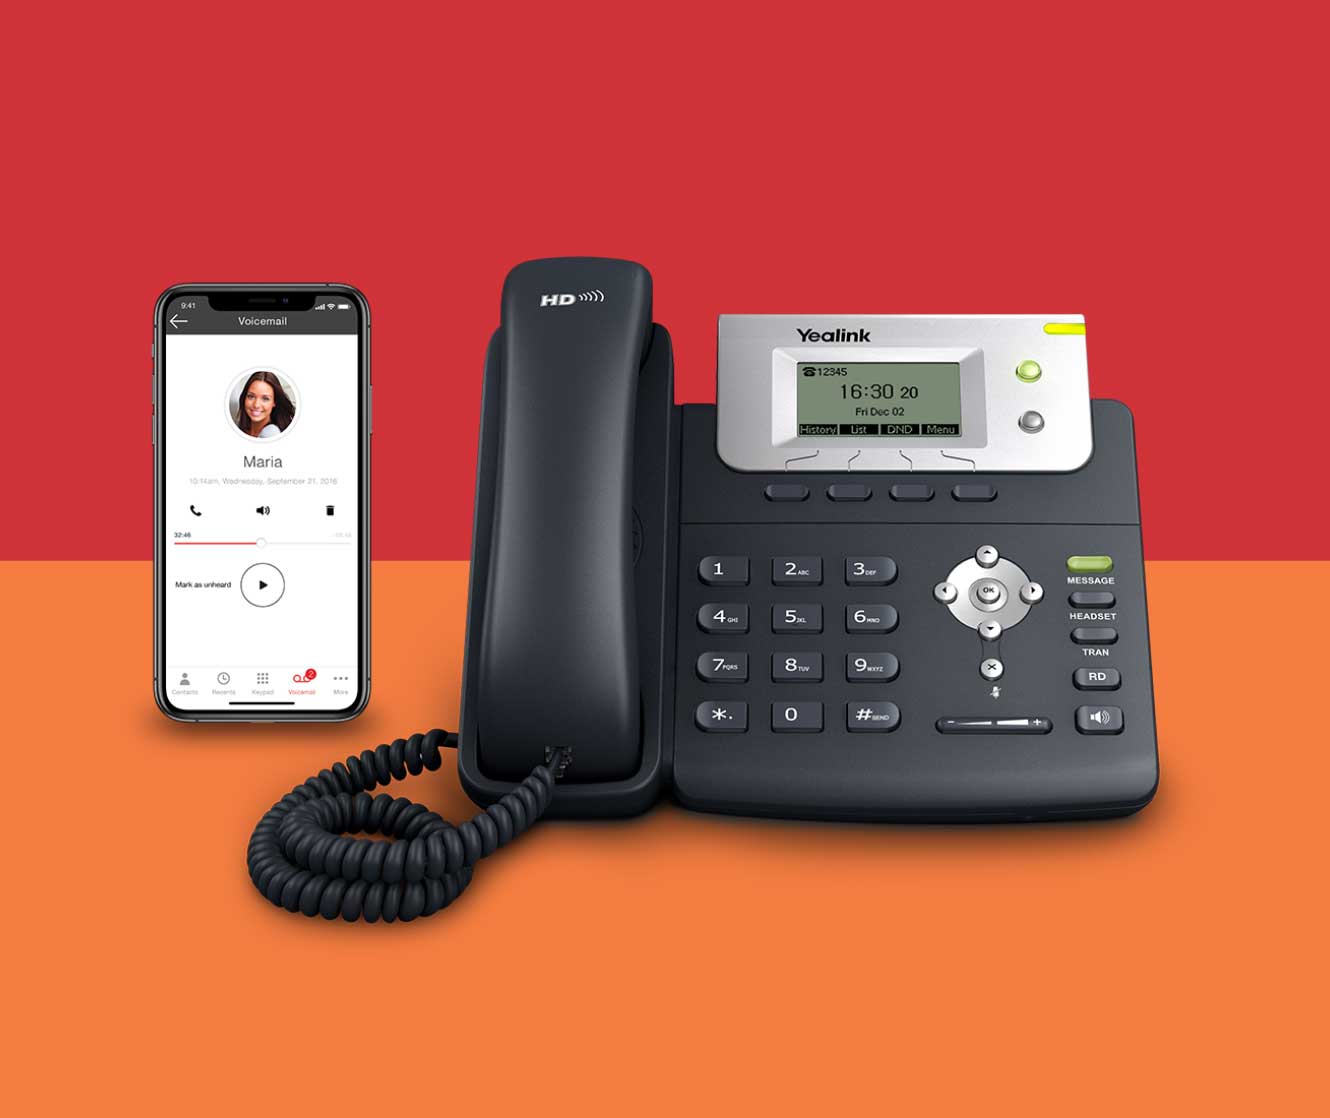 Video conferencing and Call Recording. Desktop app ooma Office 2603 Business IP Desk Phone Works with ooma Office Cloud-Based VoIP Phone Service with Virtual Receptionist 